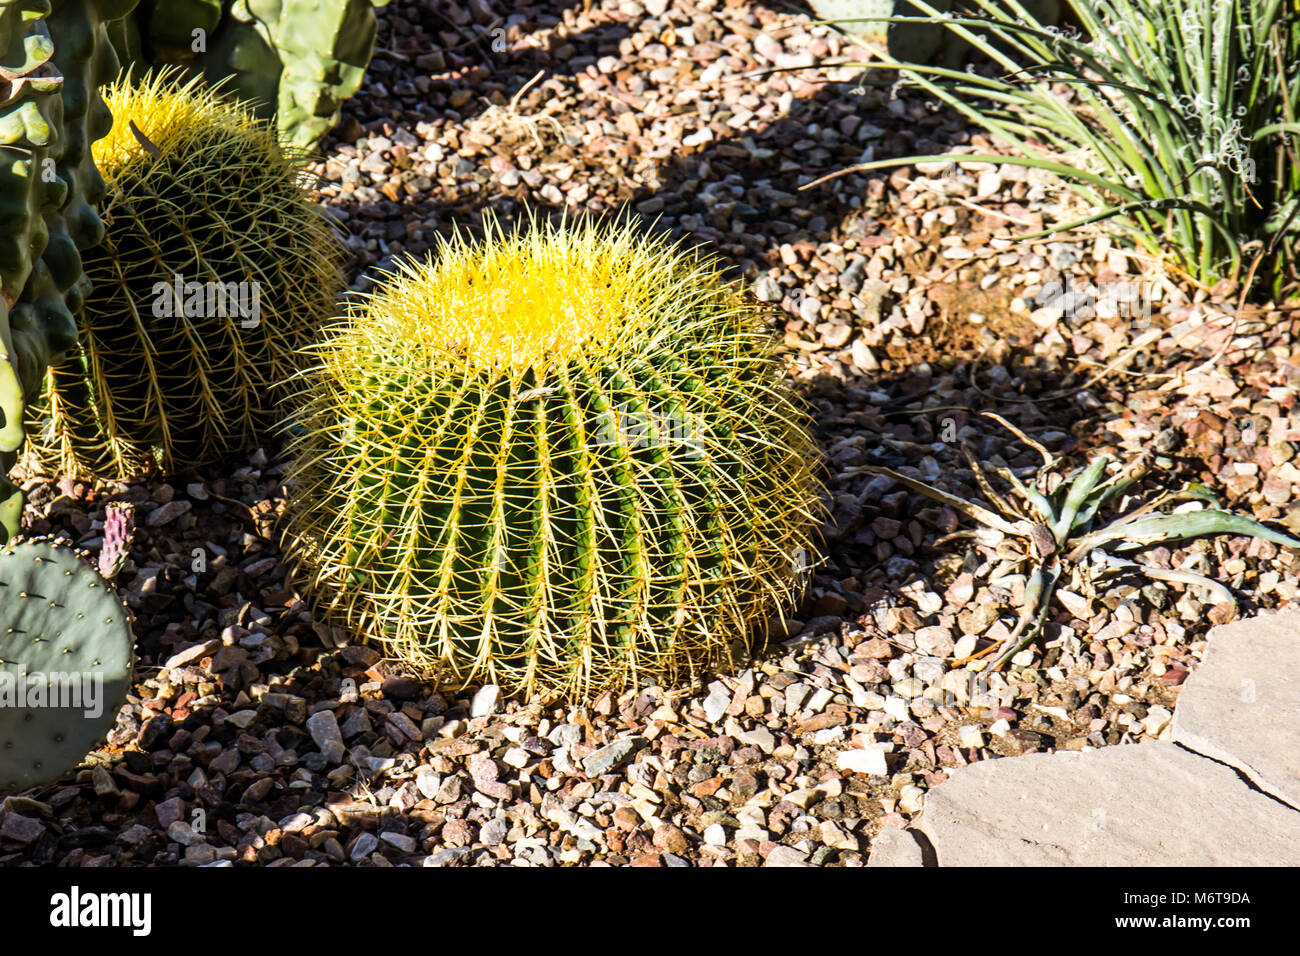 Small Barrel Cactus With Hook Barbs Stock Photo